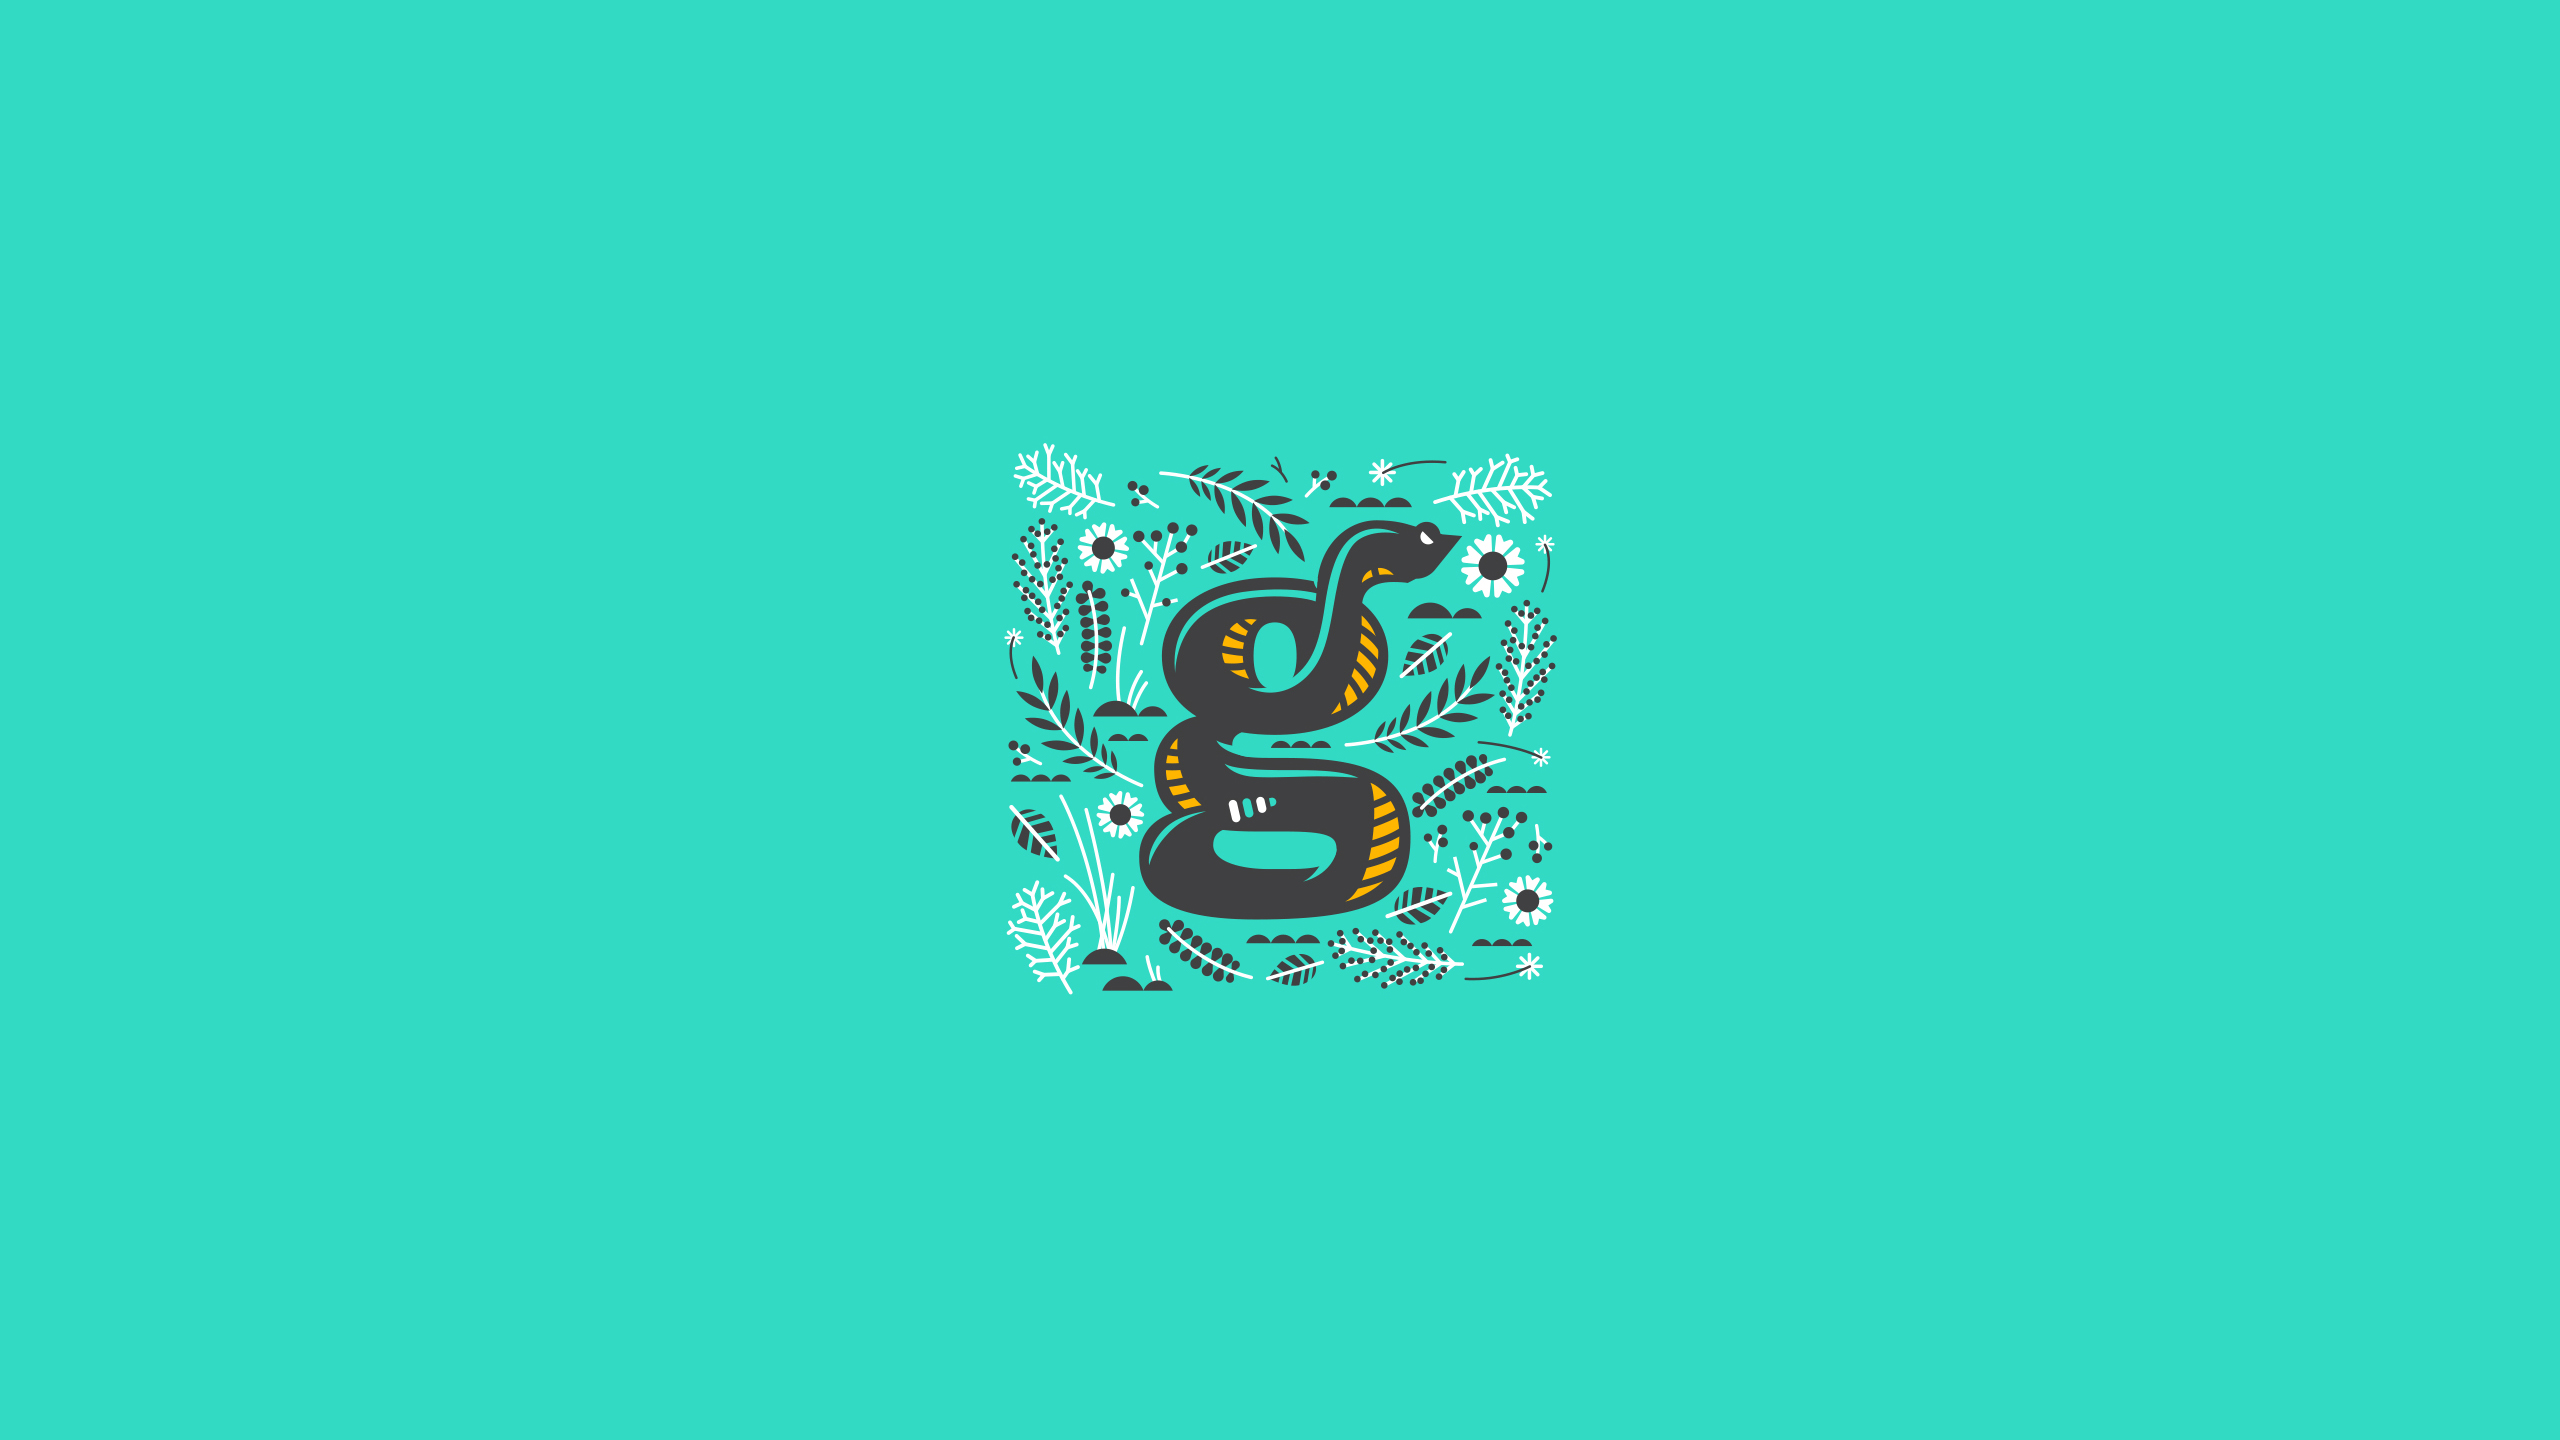 General 2560x1440 illustration letter turquoise snake typography minimalism cyan background cyan simple background teal digital art animals